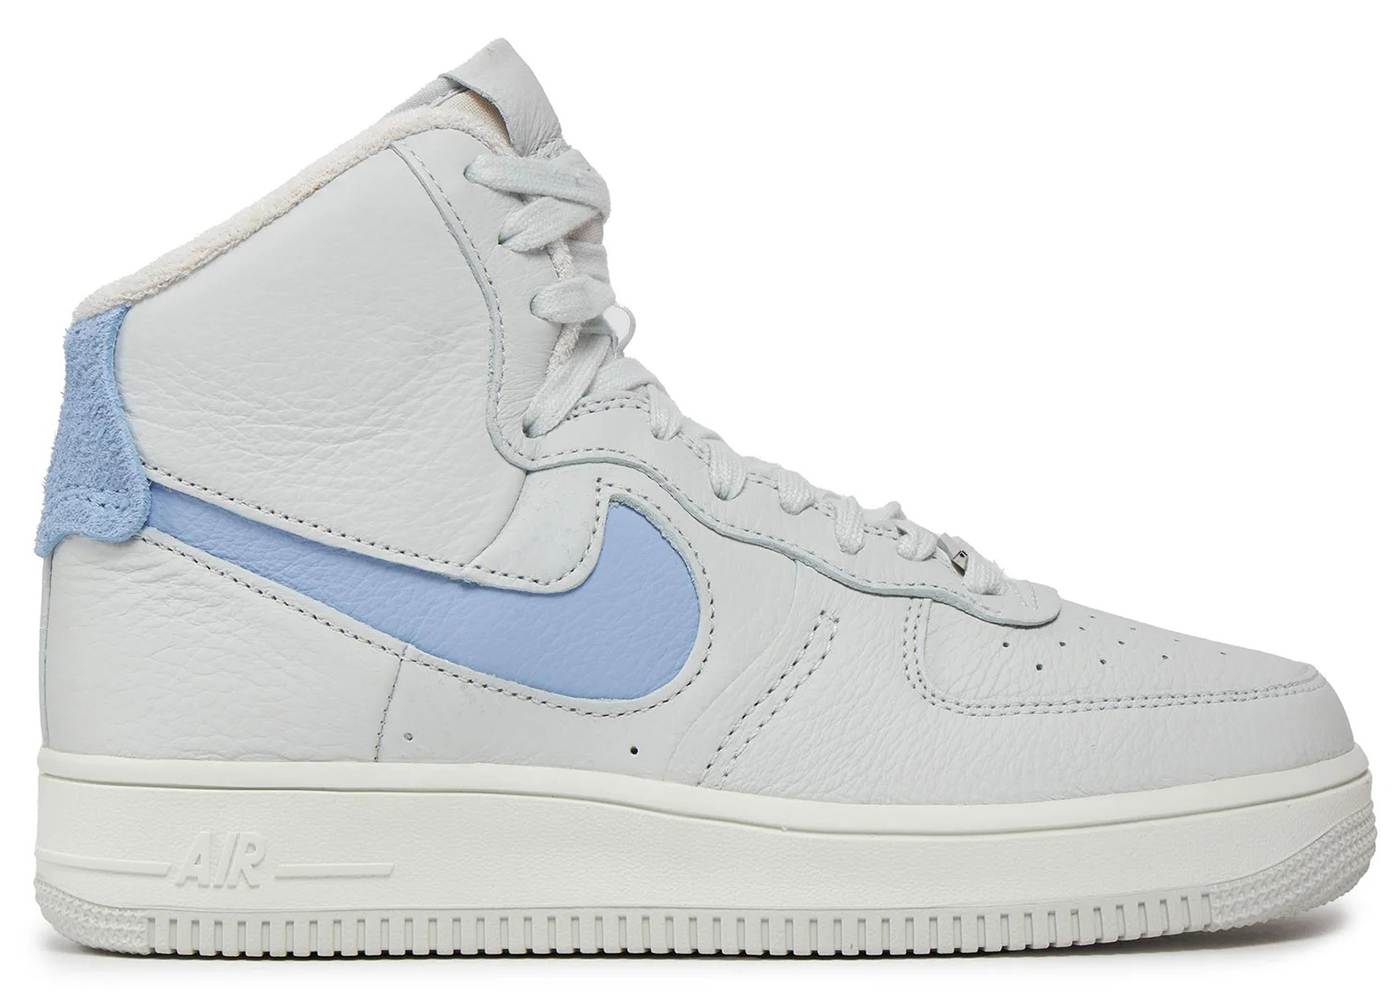 Nike Air Force 1 High Sculpt We'll Take It From Here (Women's